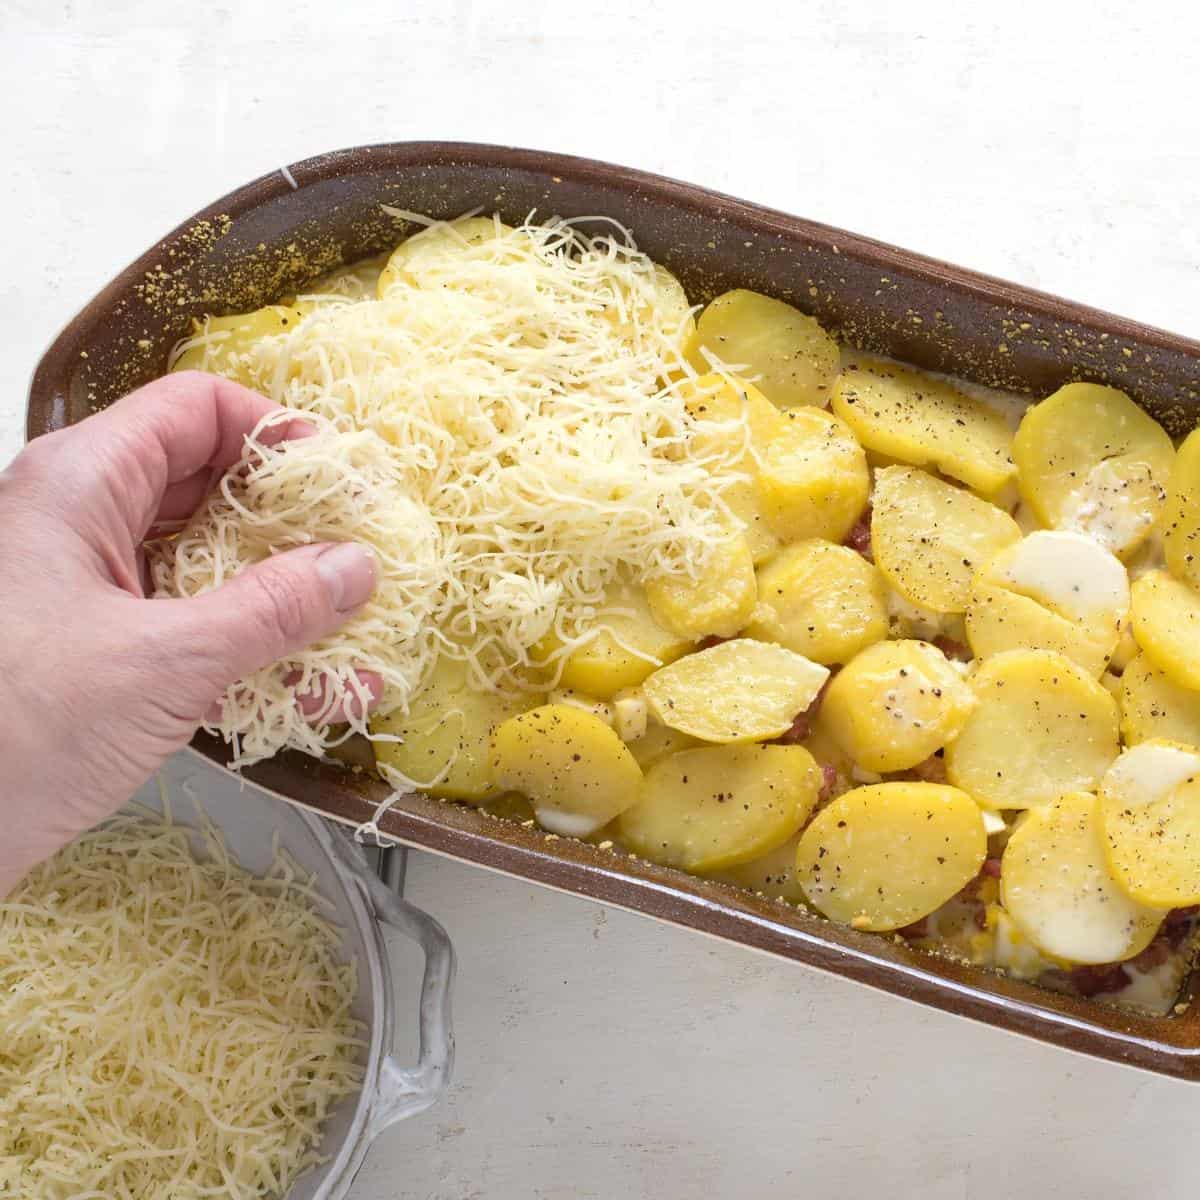 Sprinkling grated cheese over potato gratin.